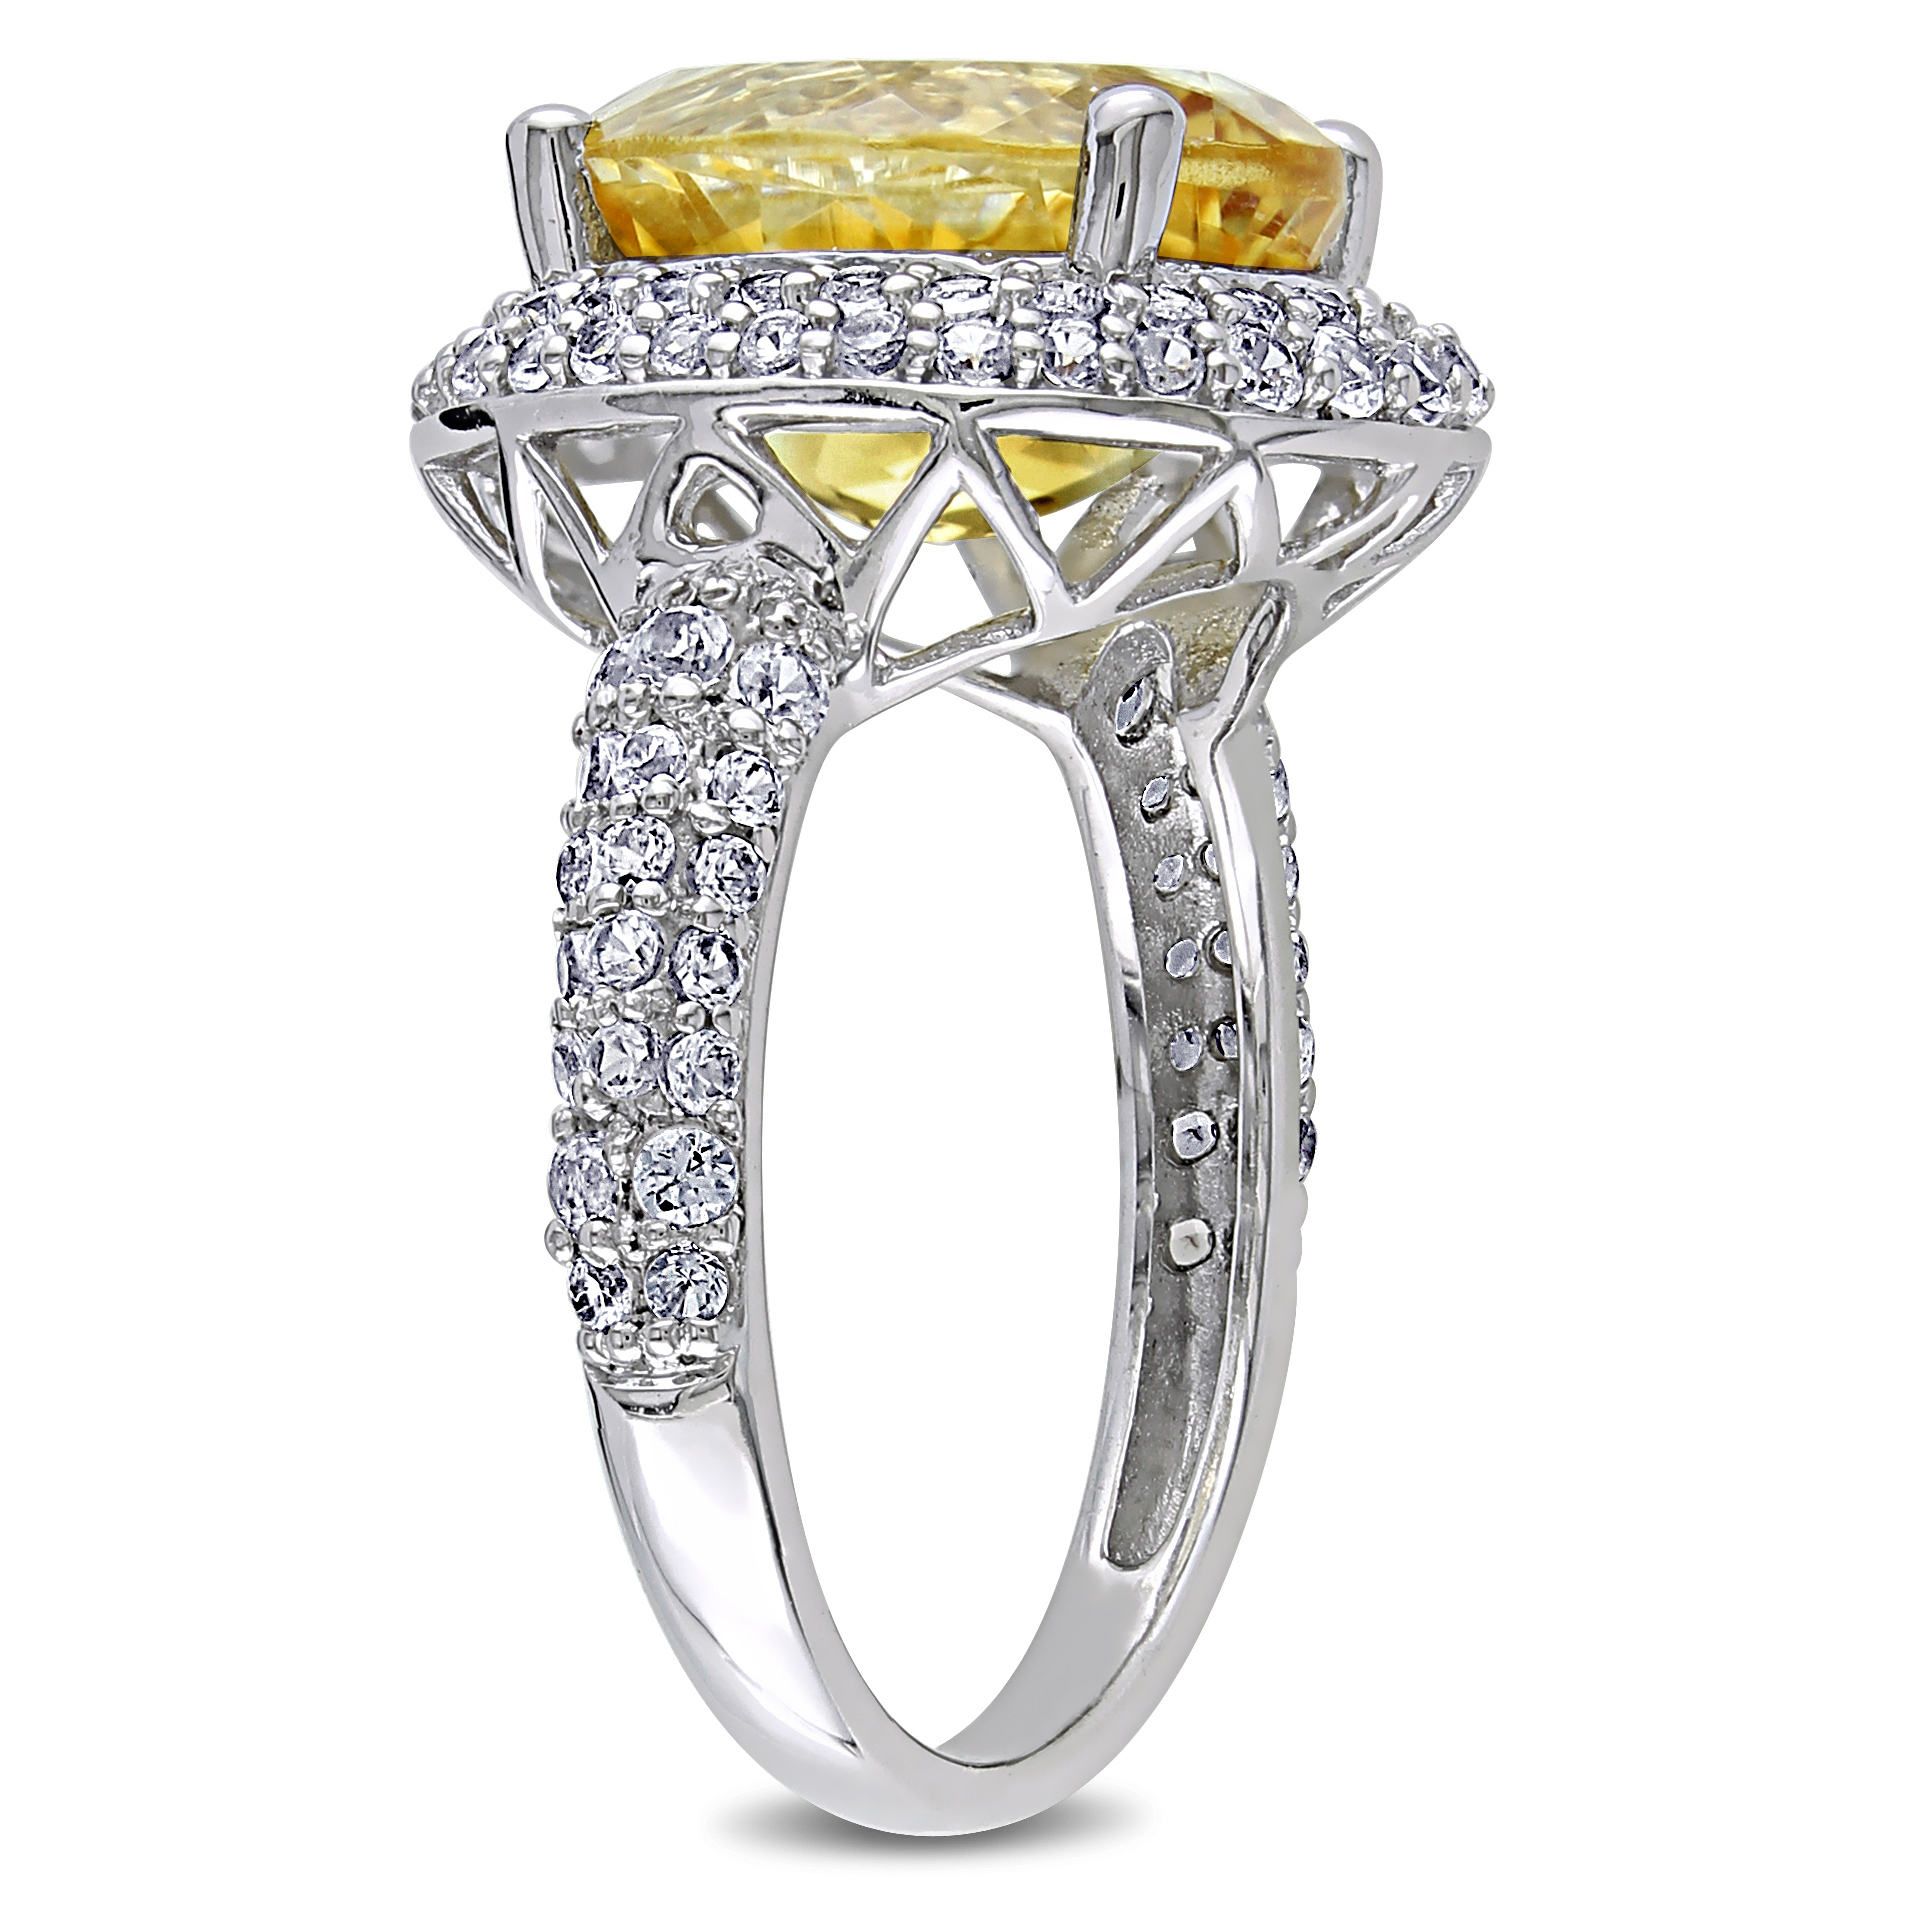 5 2/5 CT TGW Oval Cut Citrine and Created White Sapphire Double Halo Ring in Sterling Silver